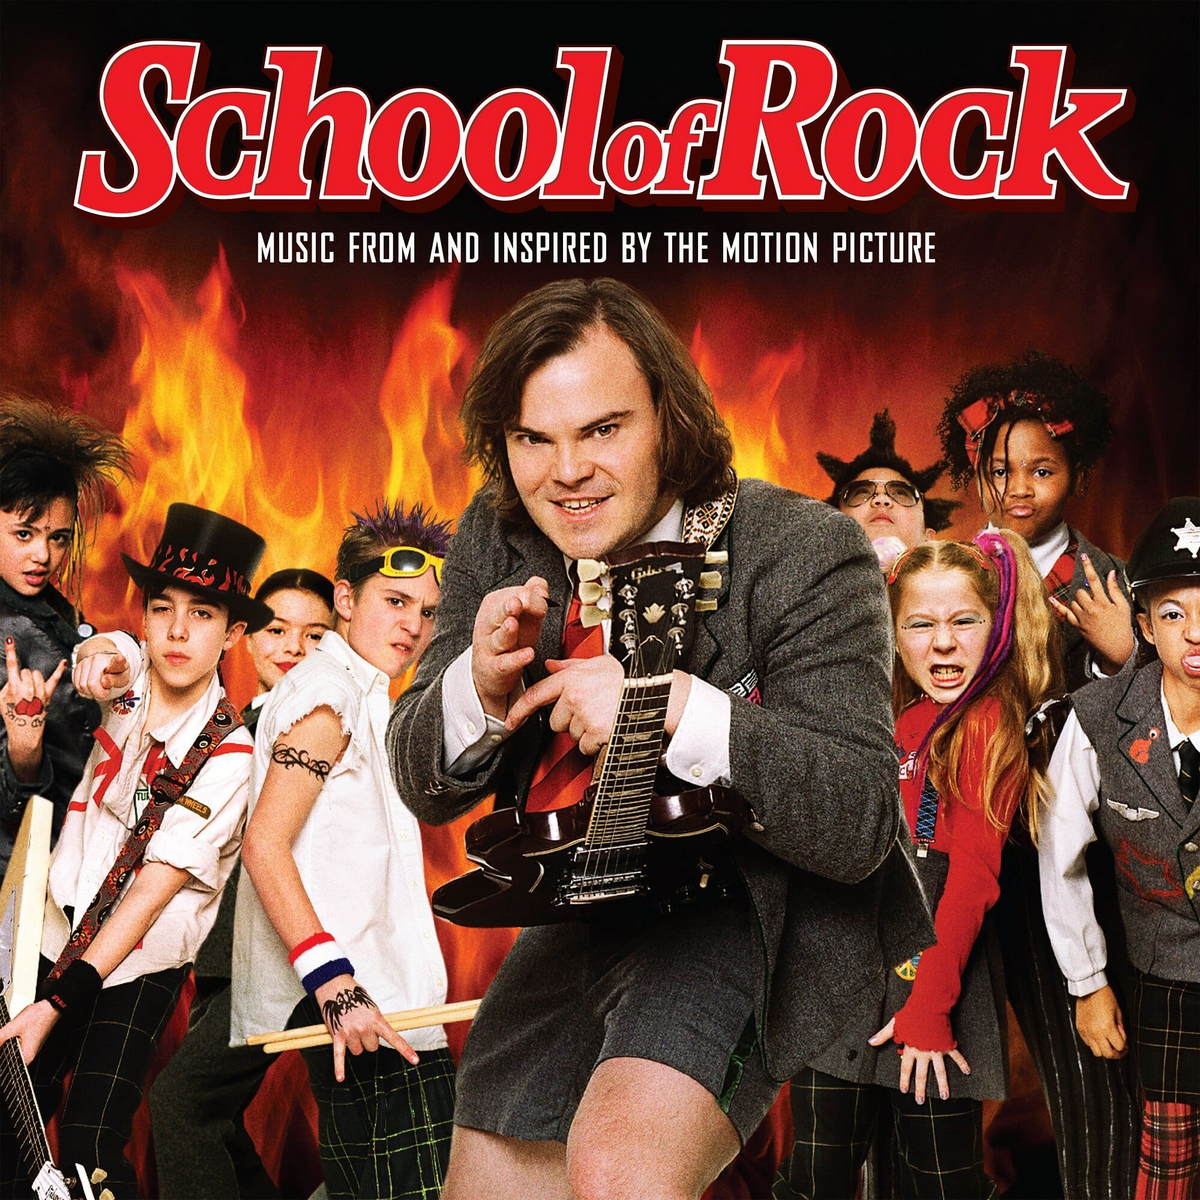 Саундтрек WM School of Rock (Music From And Inspired By The Motion Picture) (Rocktober 2021/Limited/Orange Vinyl) 2021 new 24 colors full size dry crayons school supplies colored pencil drawing all for age wood safe child fast delivery hot